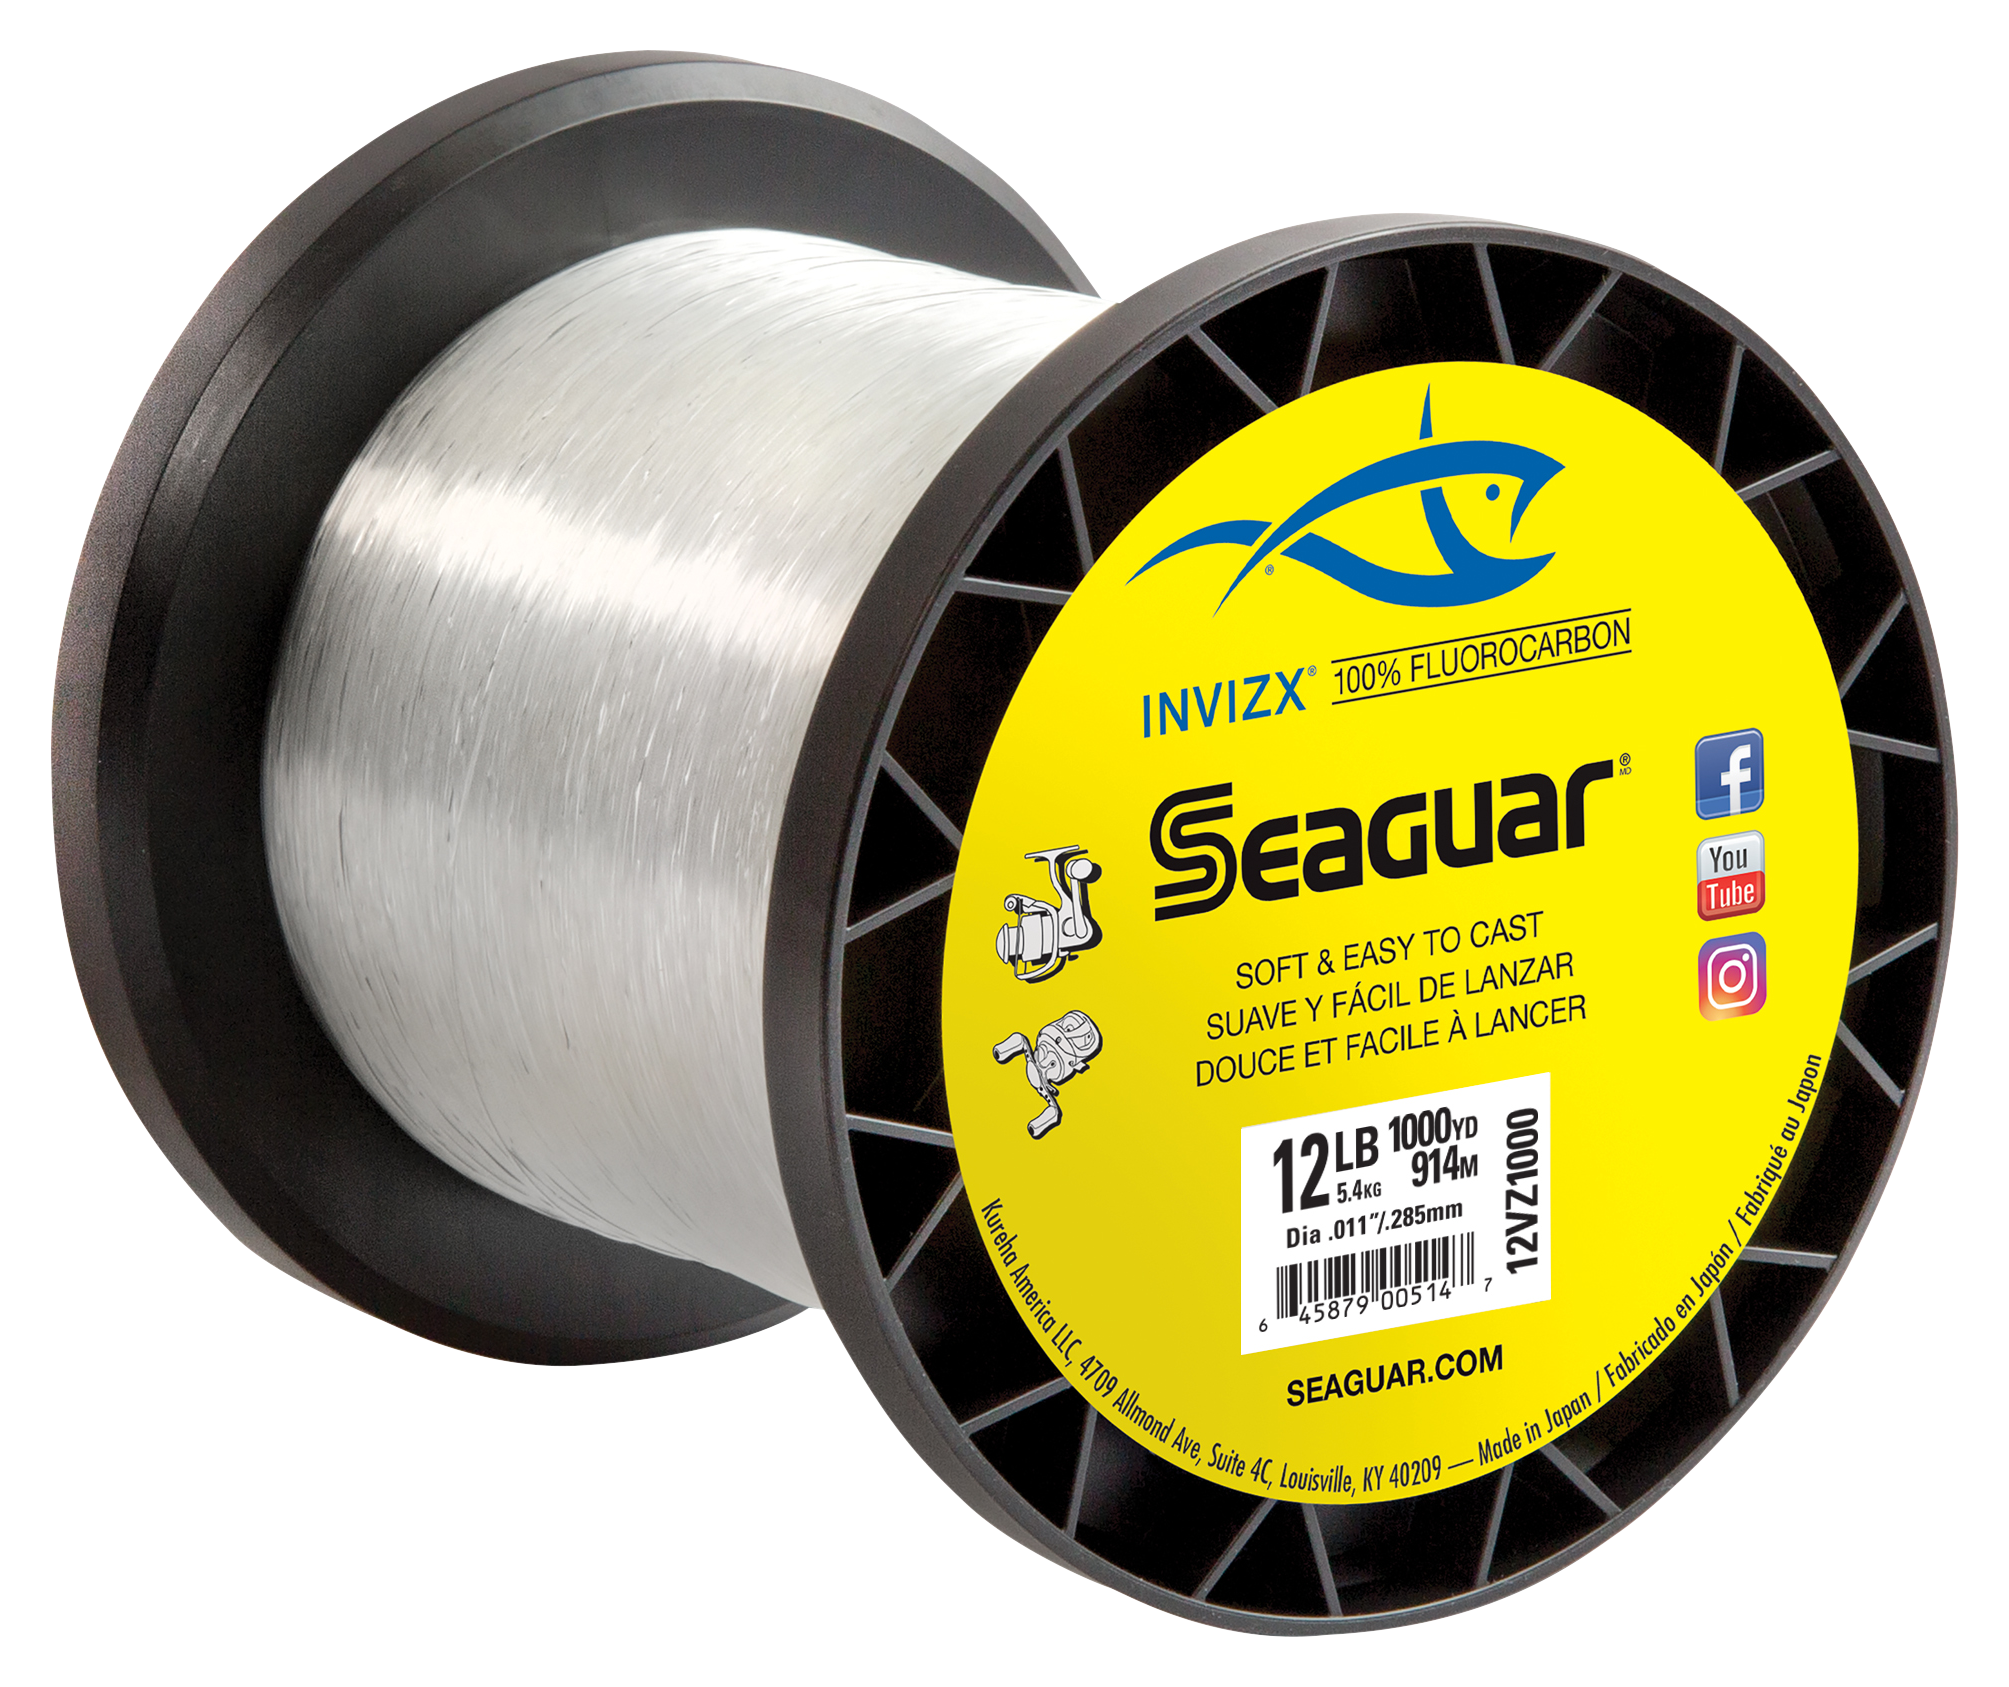 Seaguar Red Label Fluorocarbon Fishing Line Clear 15 lb 1000 yards